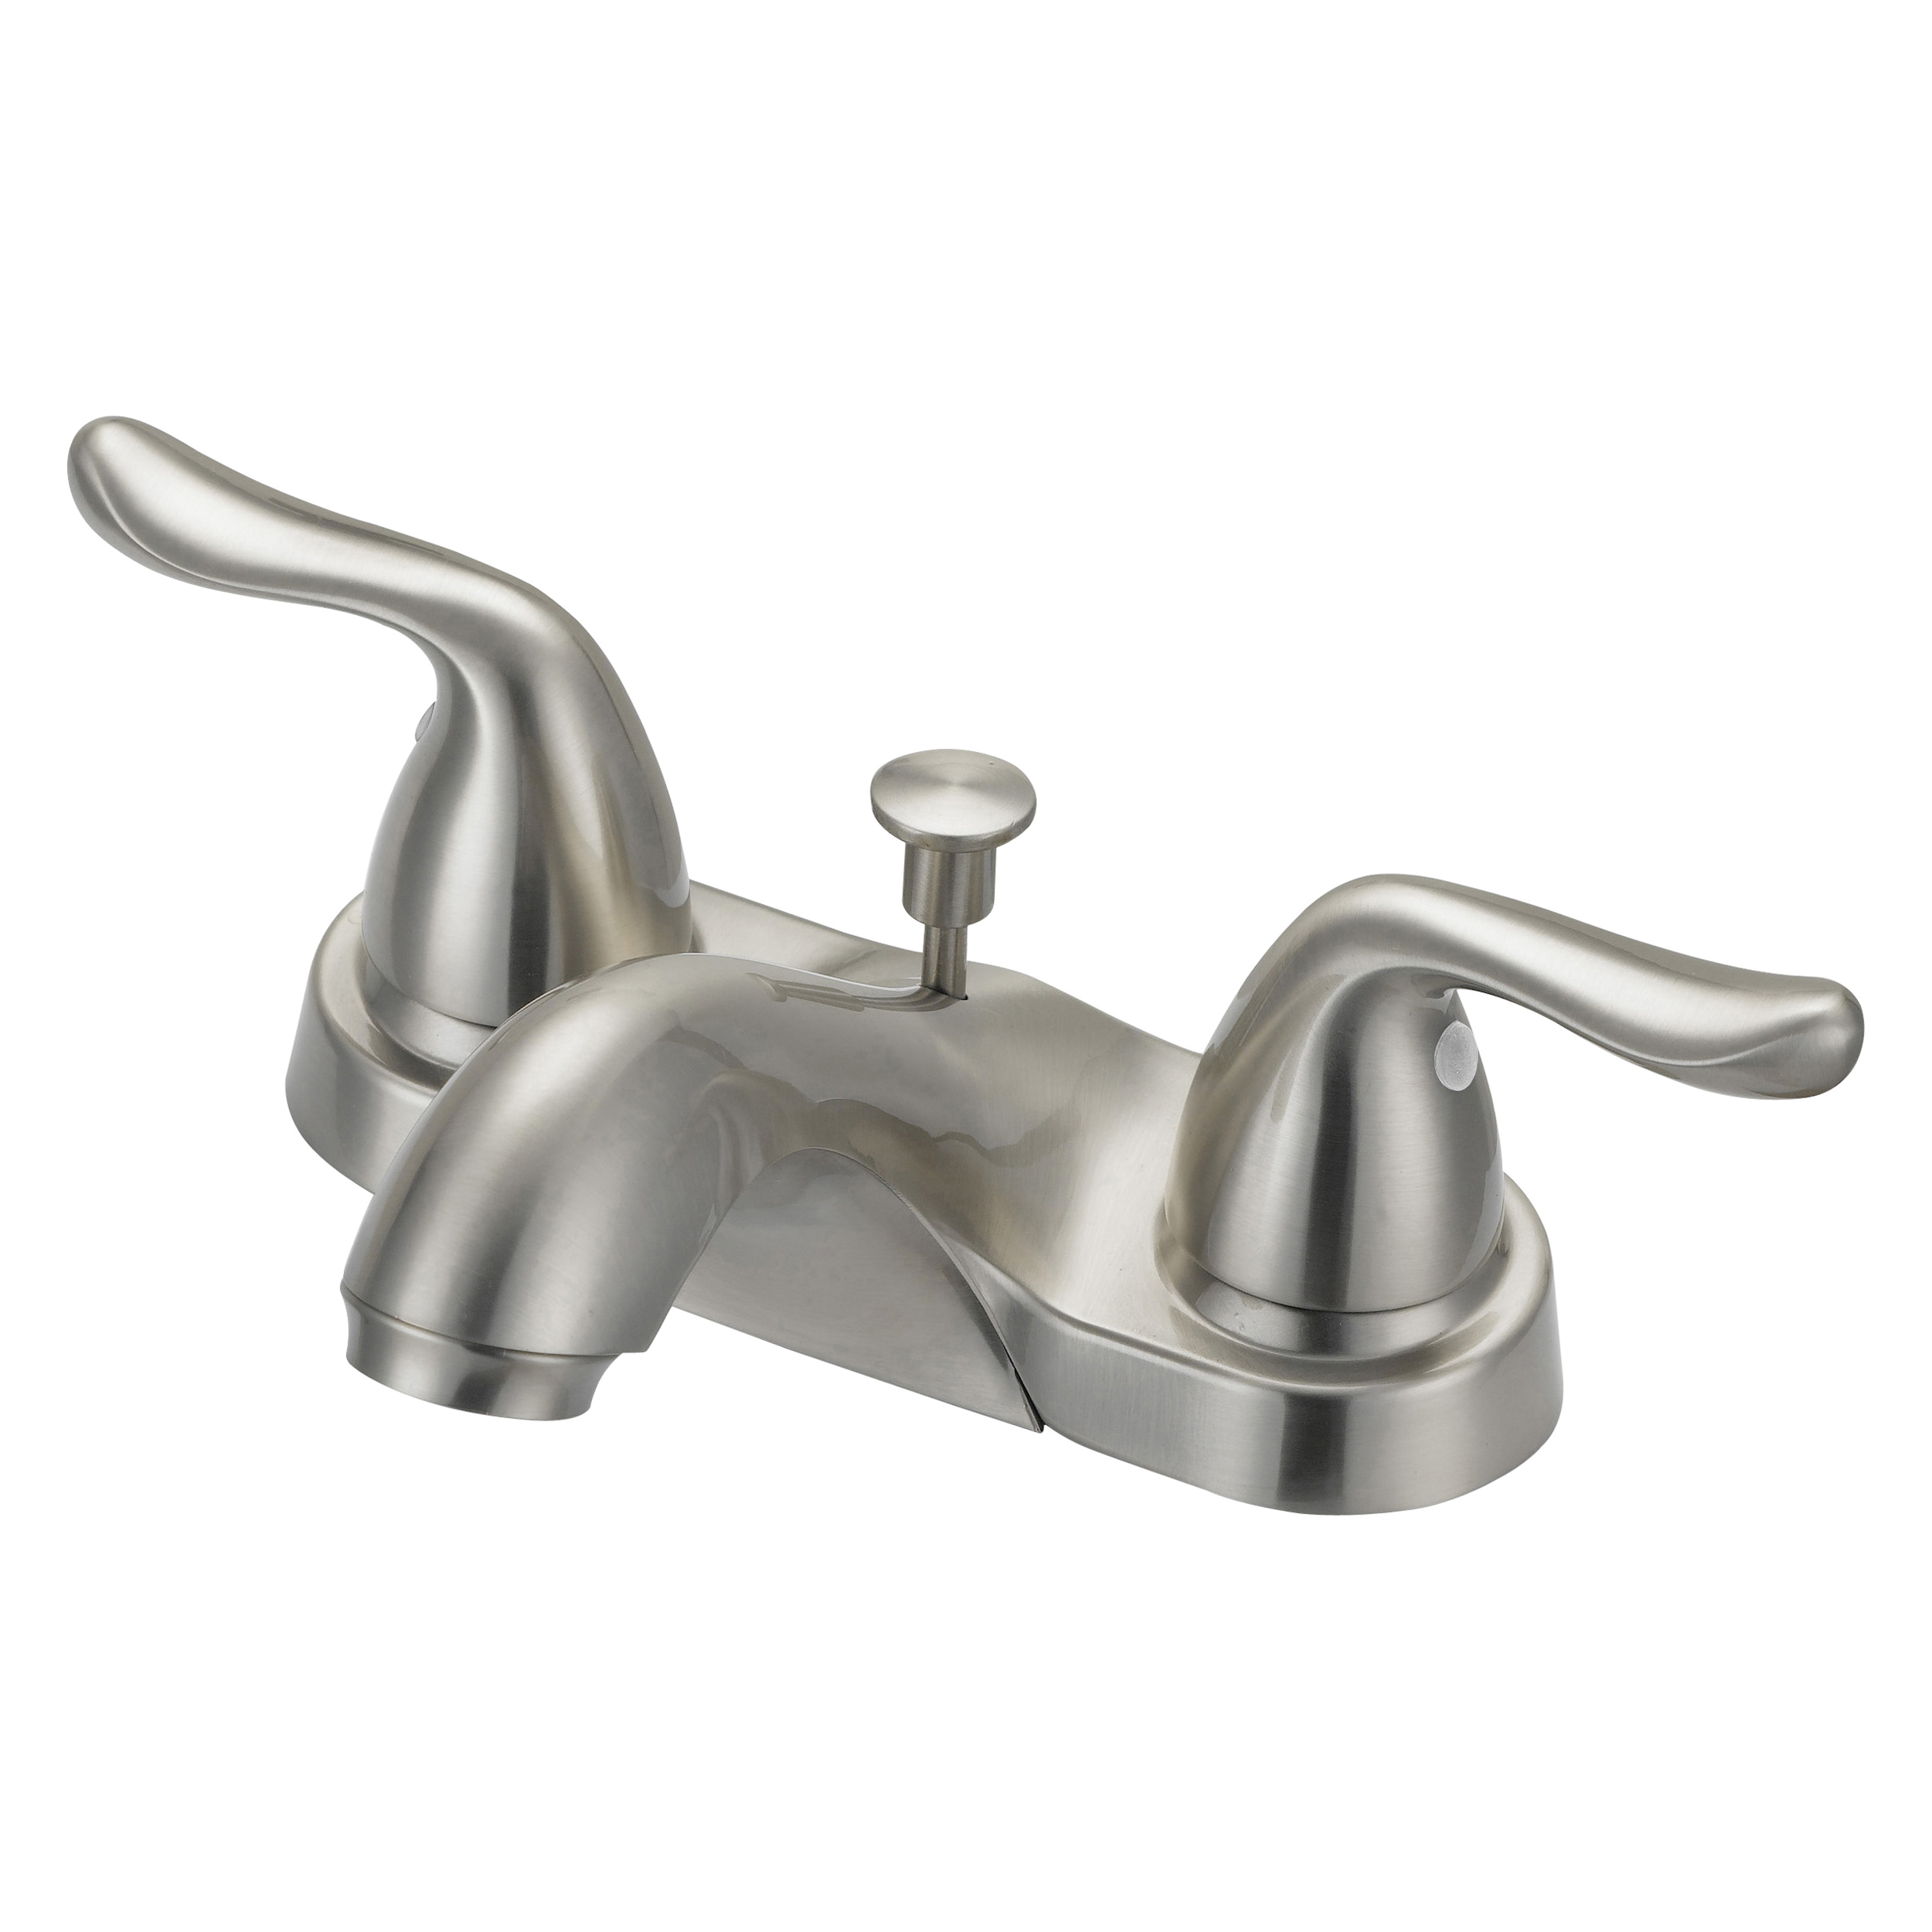 F5121033NP Lavatory Faucet, 1.2 gpm, 2 -Faucet Handle, 3 -Faucet Hole, Metal, Brushed Nickel